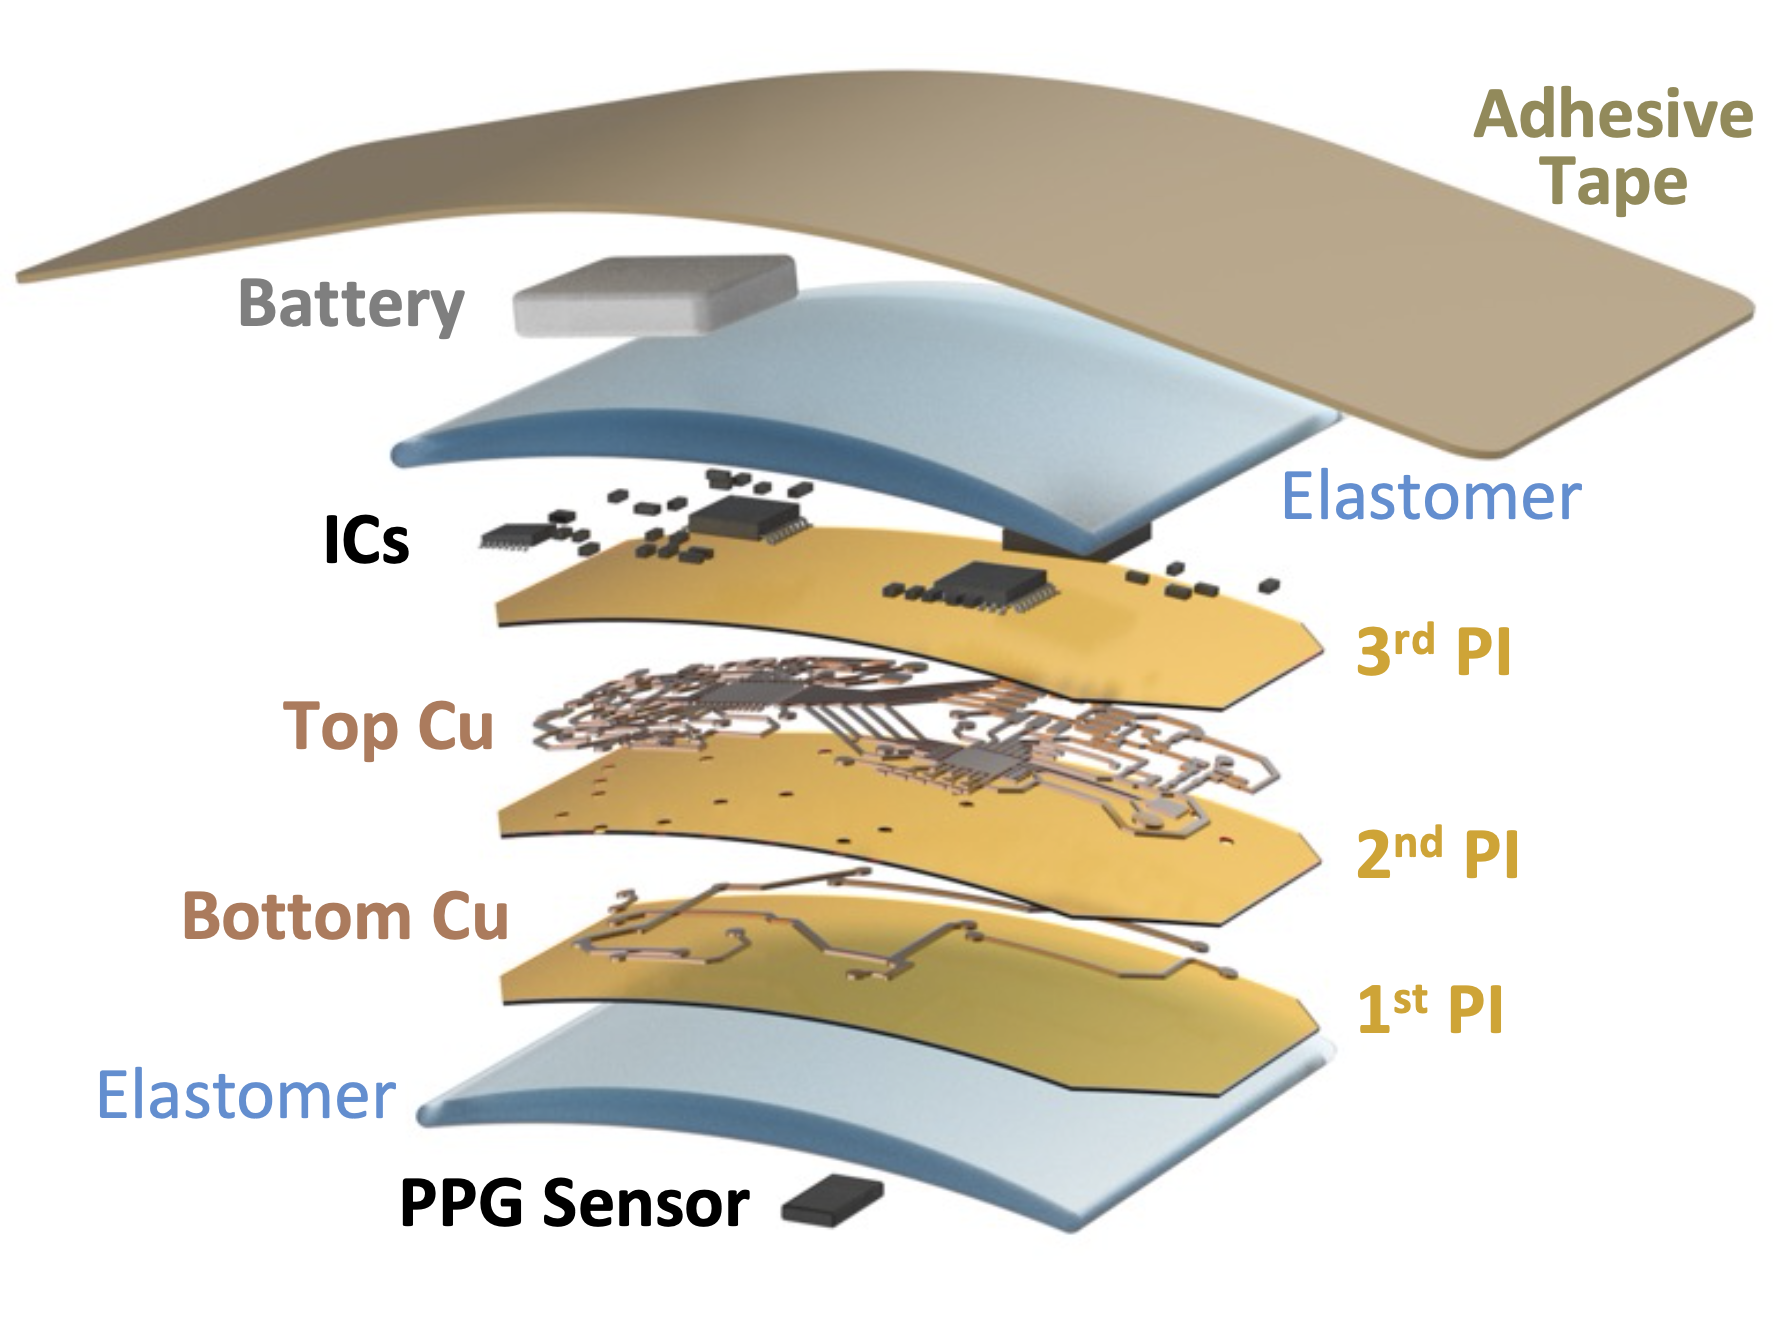 Bottom to top: PPG sensor, elastomer interface, bottom close-up, top close-up, ICs, elastomer interface, battery, and adhesive tape.